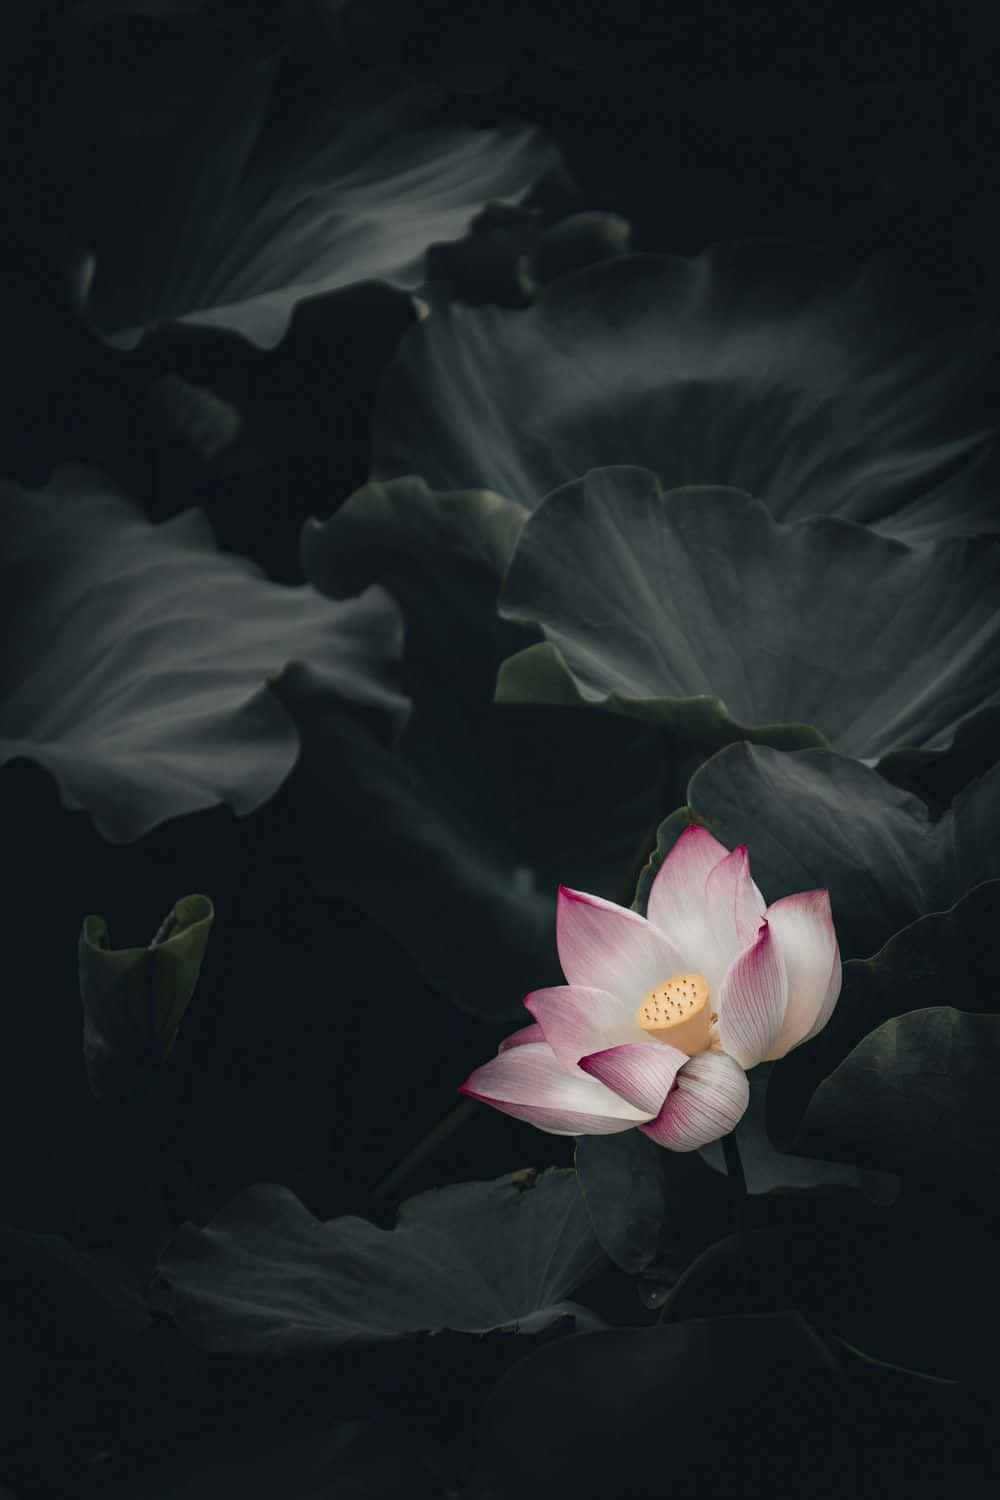 Captivating Brilliance of the Lotus